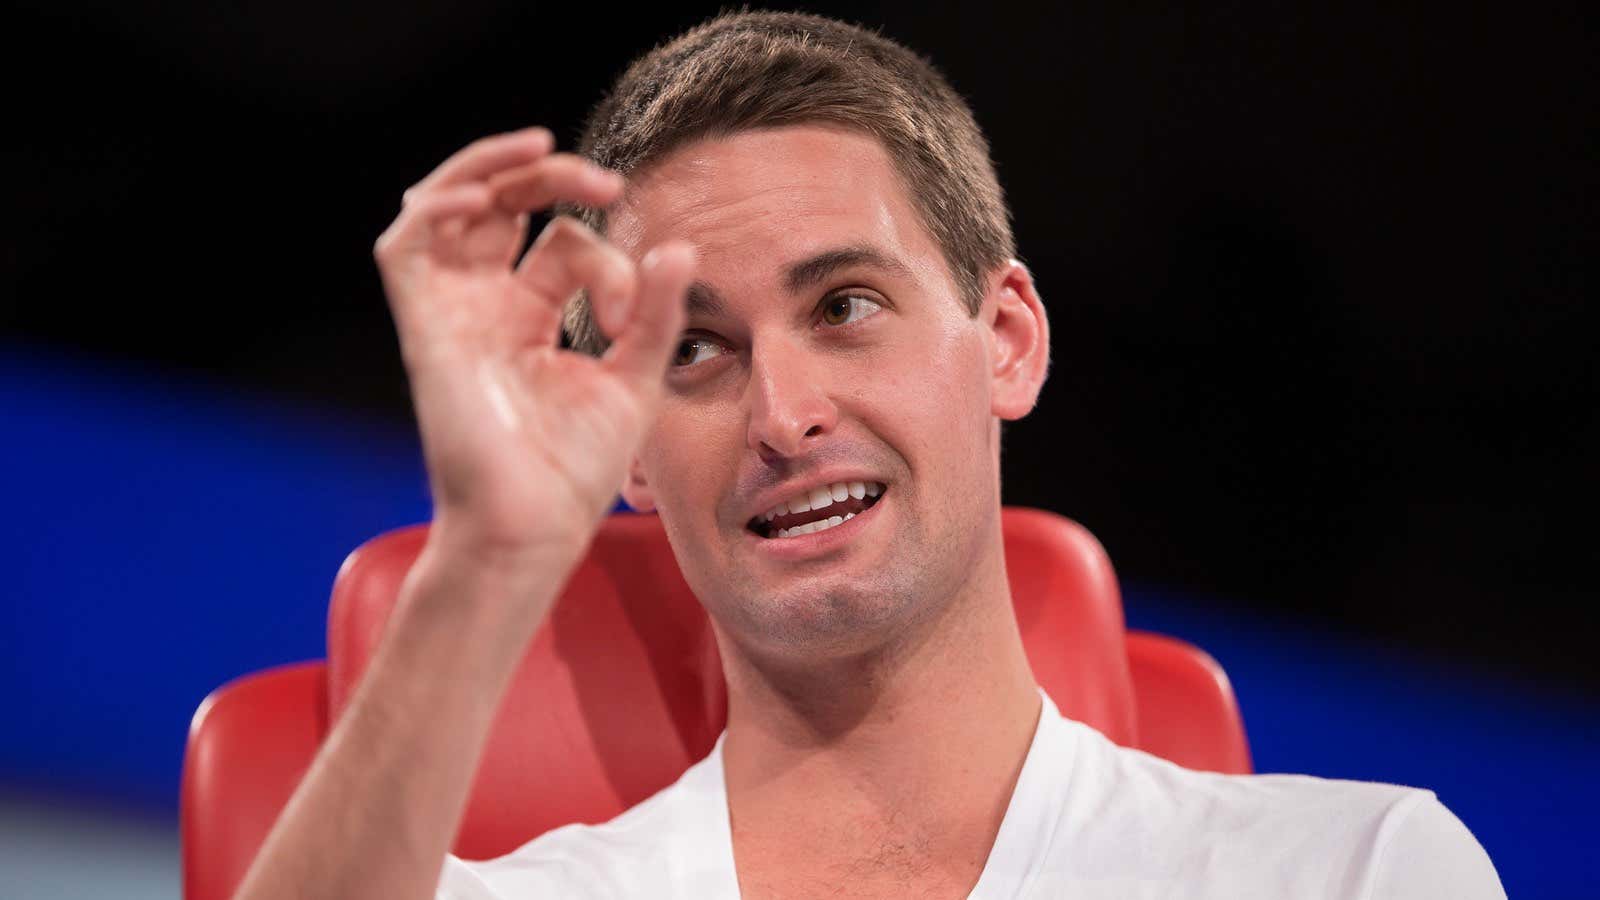 Snapchat’s Evan Spiegel at the 2015 Code Conference.